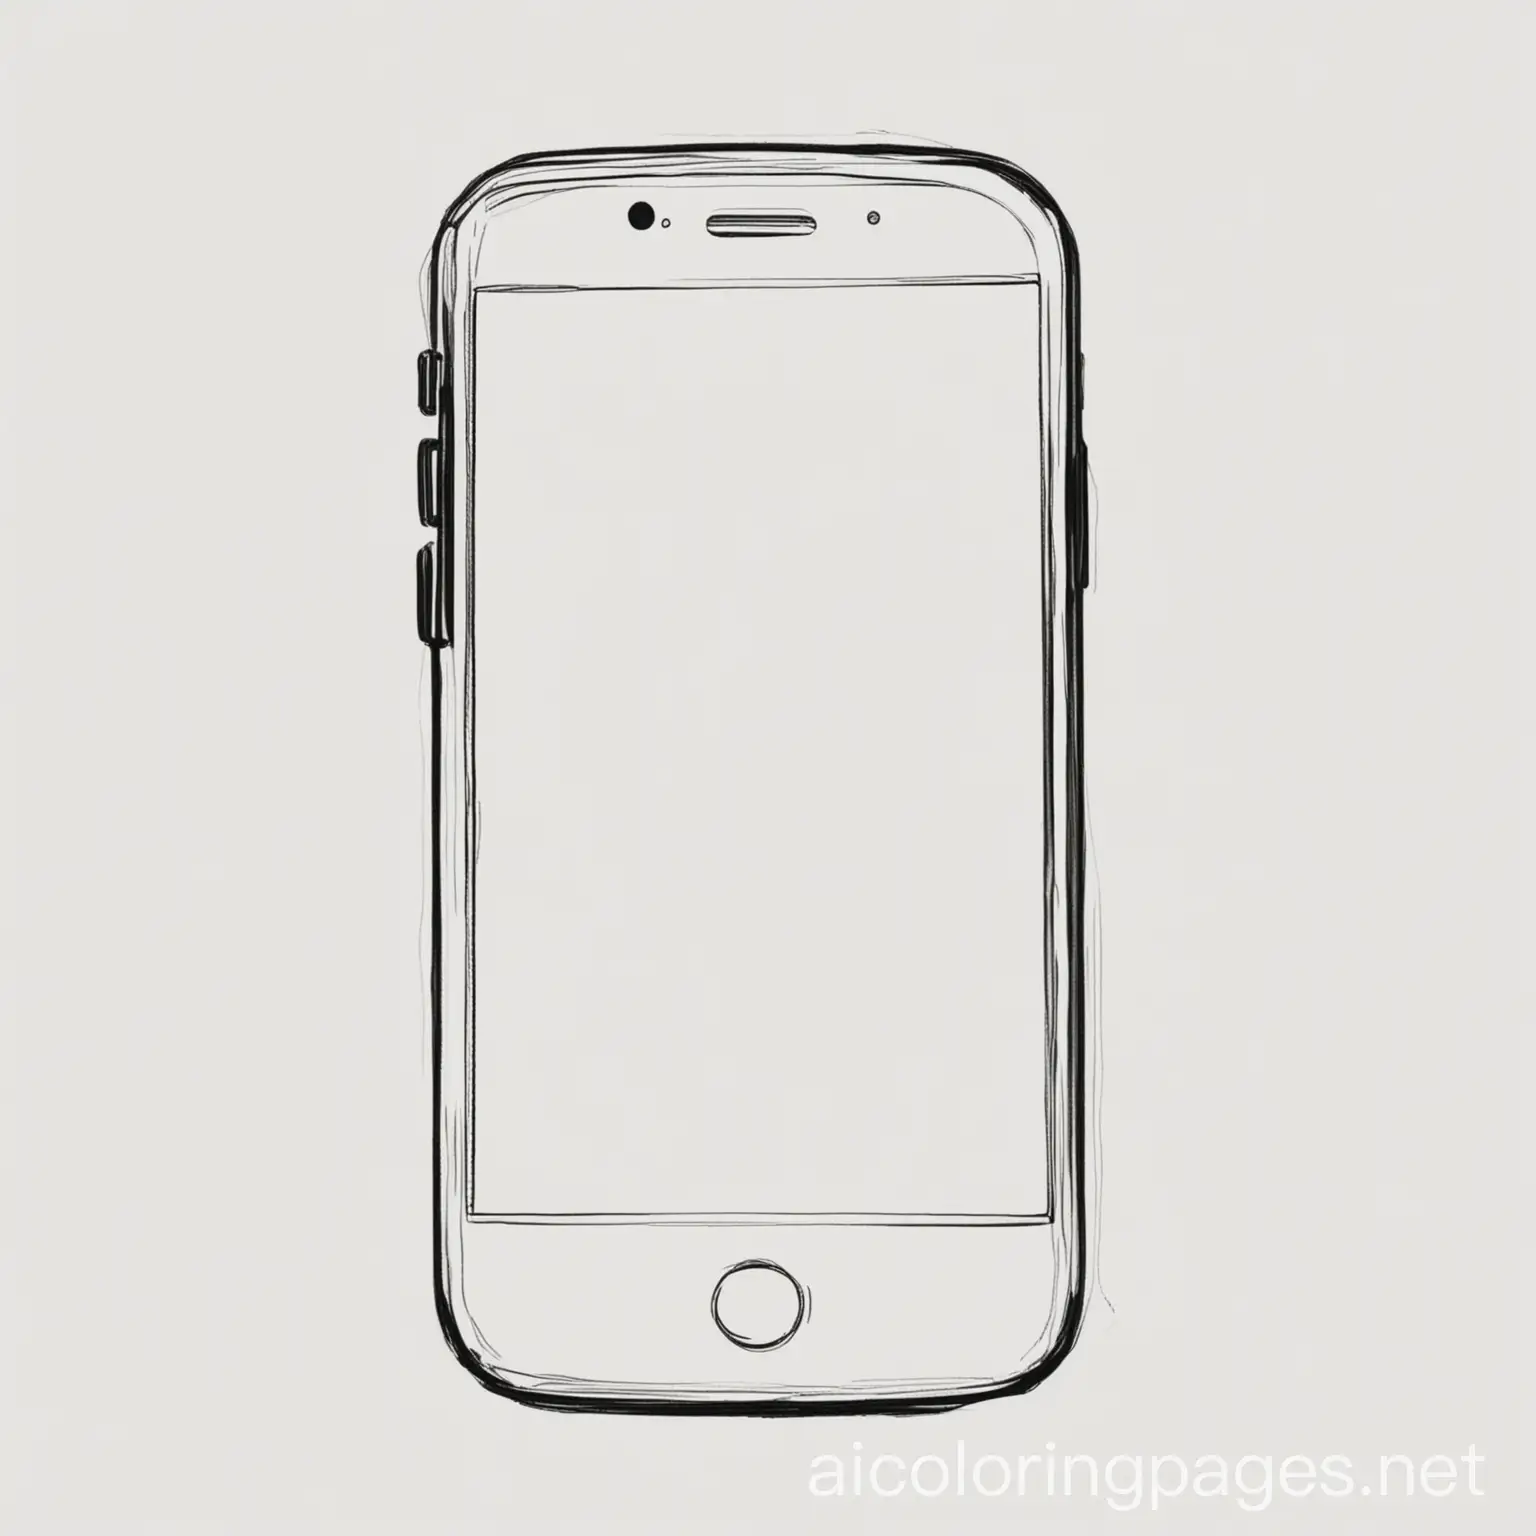 cell phone, Coloring Page, black and white, line art, white background, Simplicity, Ample White Space